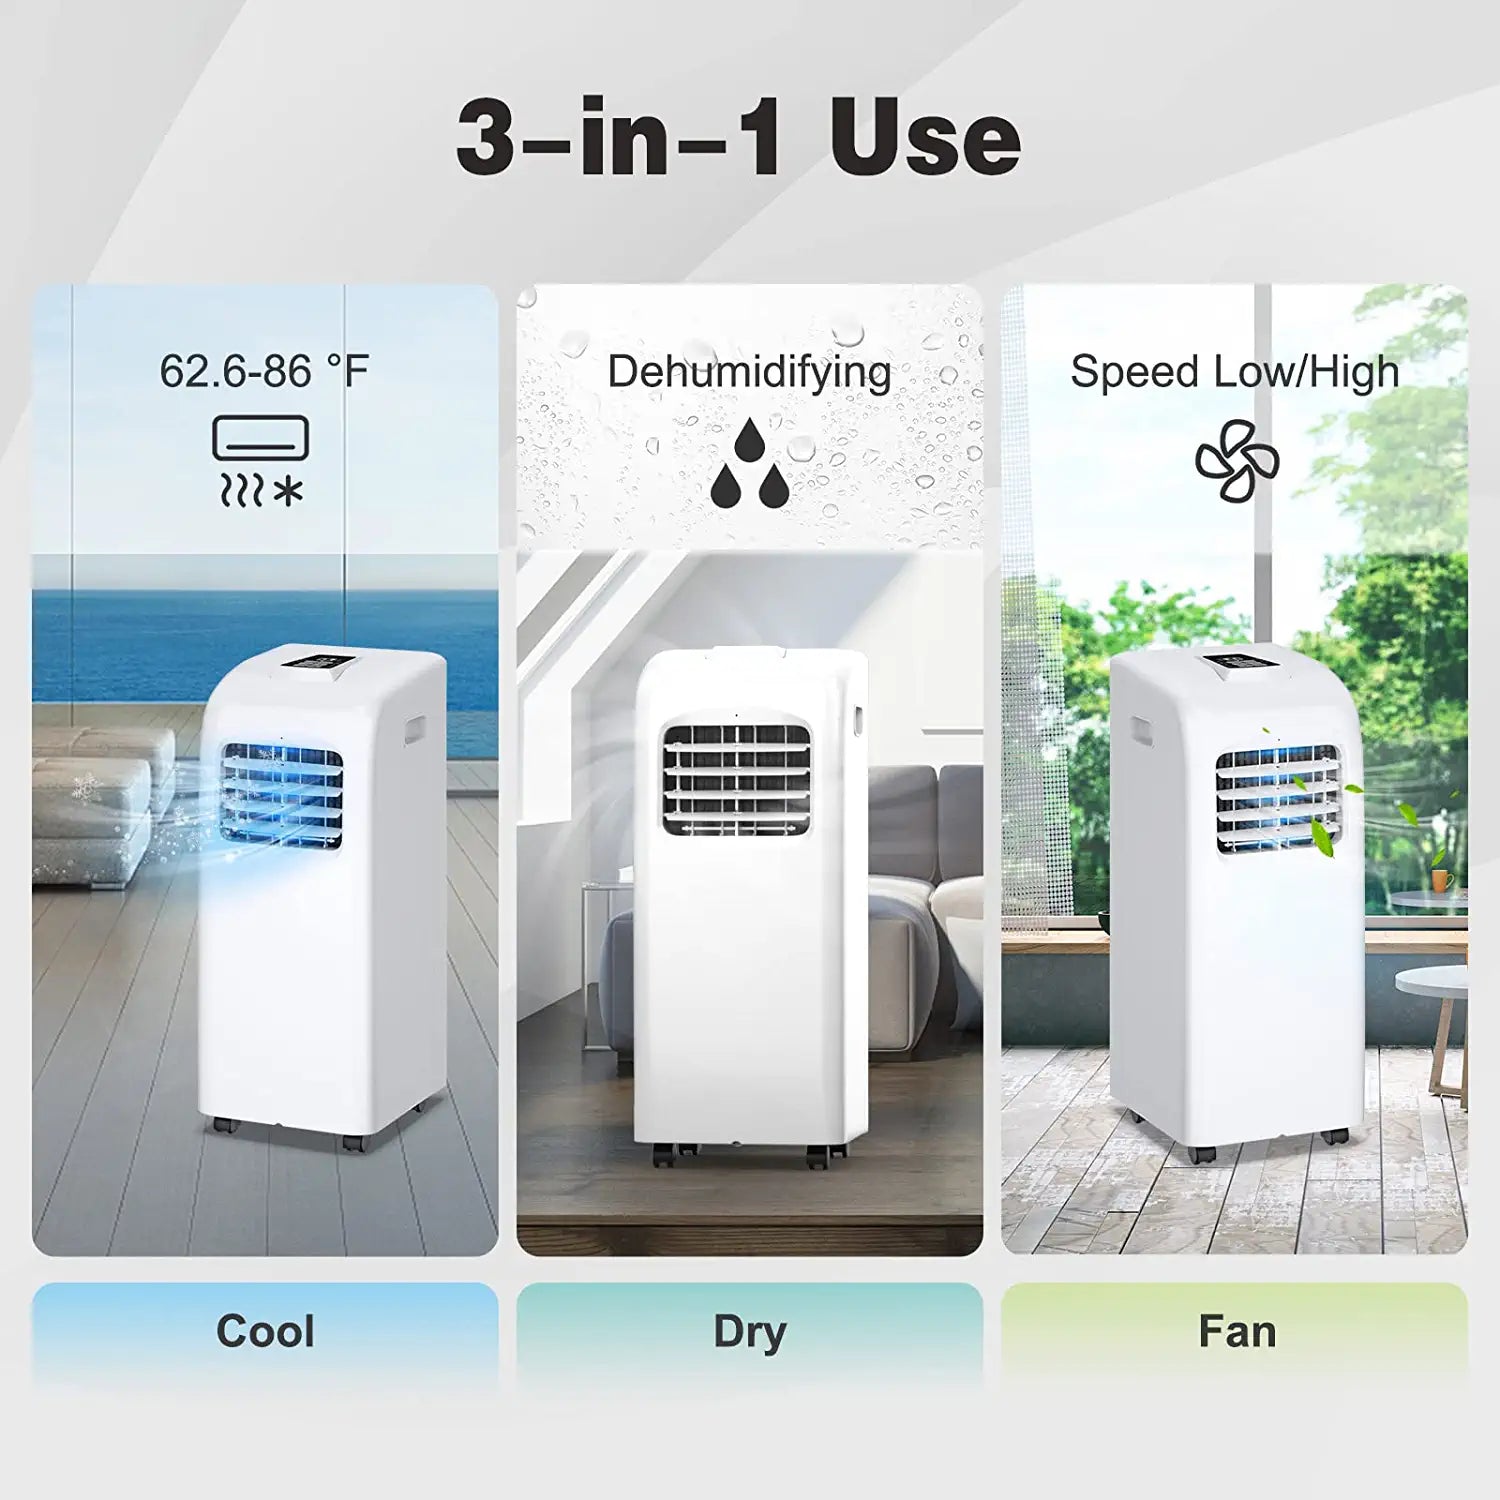 Chairliving 8000 BTU Portable Air Conditioner Cooler with Dehumidifier Function and Remote Control